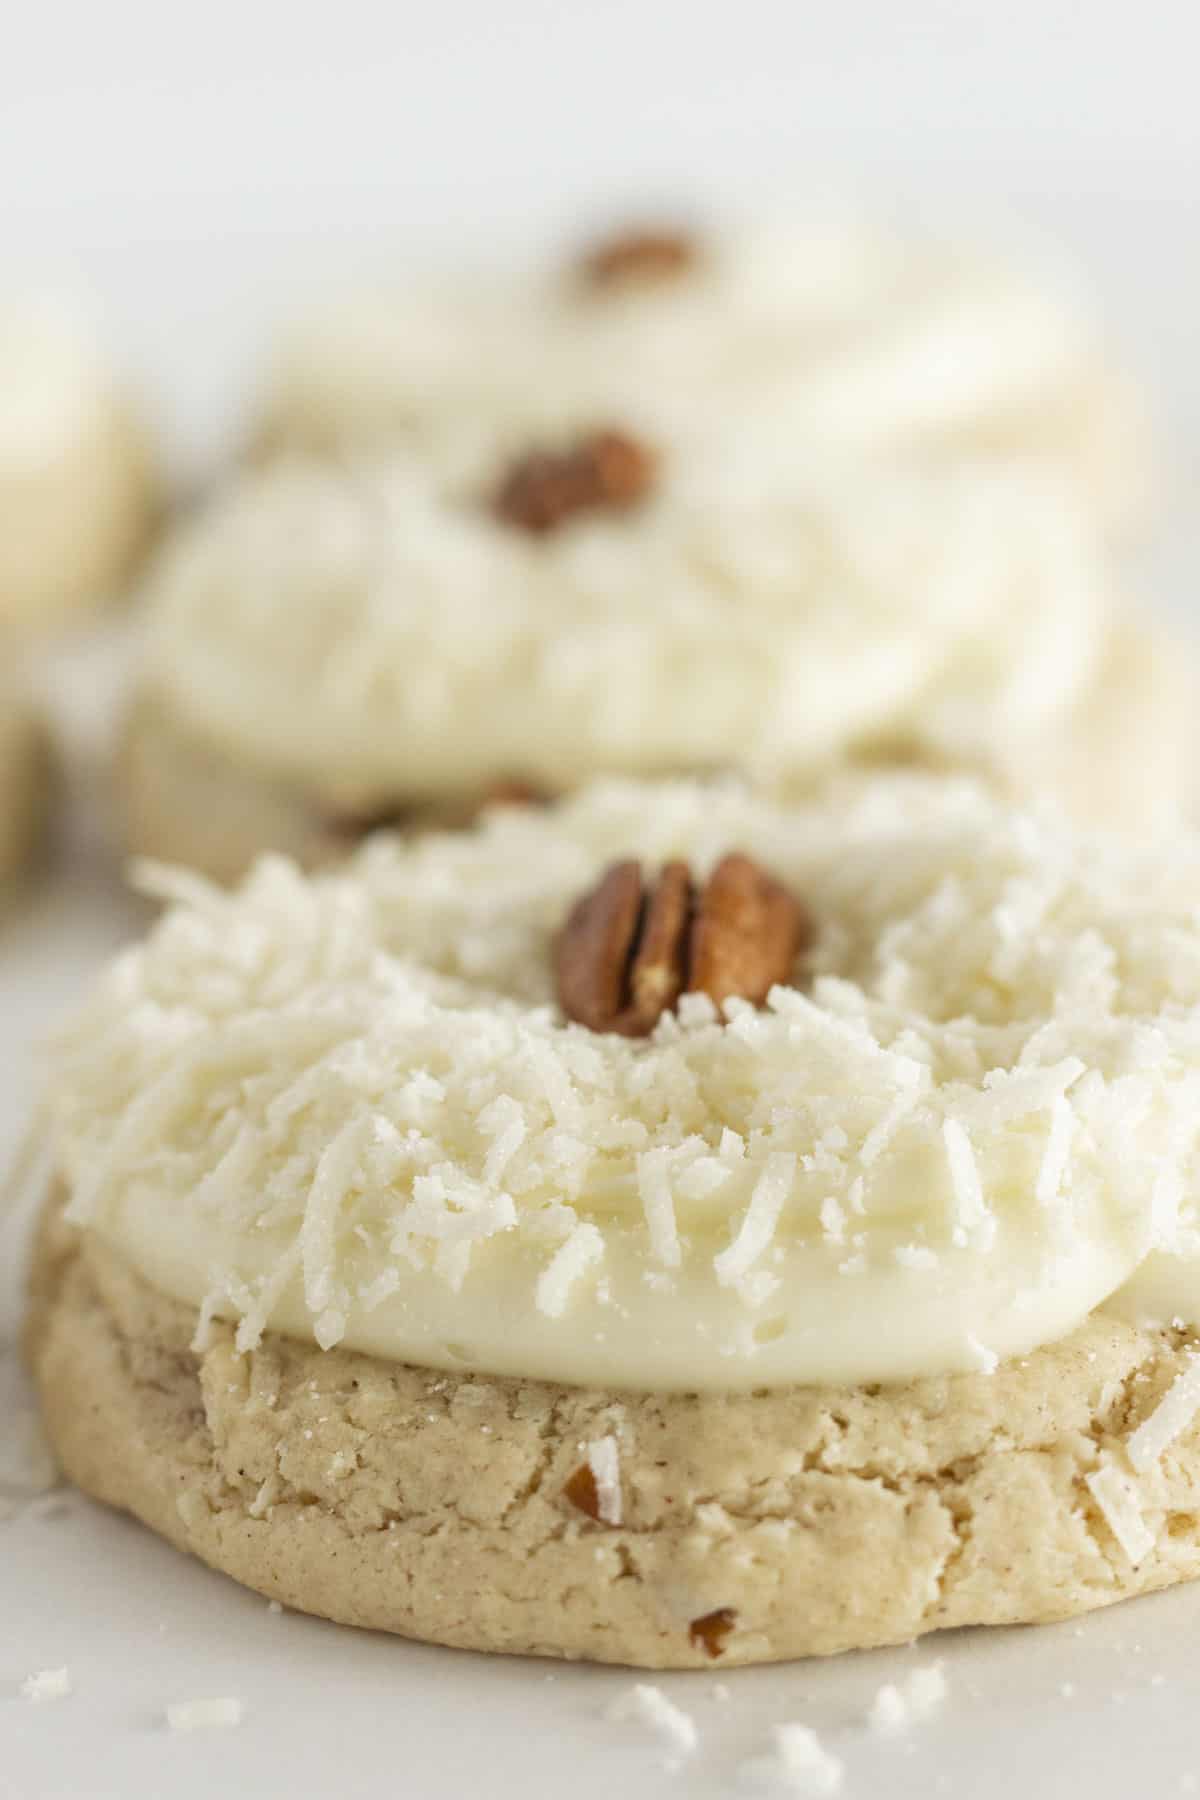 6 large Coconut Pecan Cookies with cream cheese frosting.